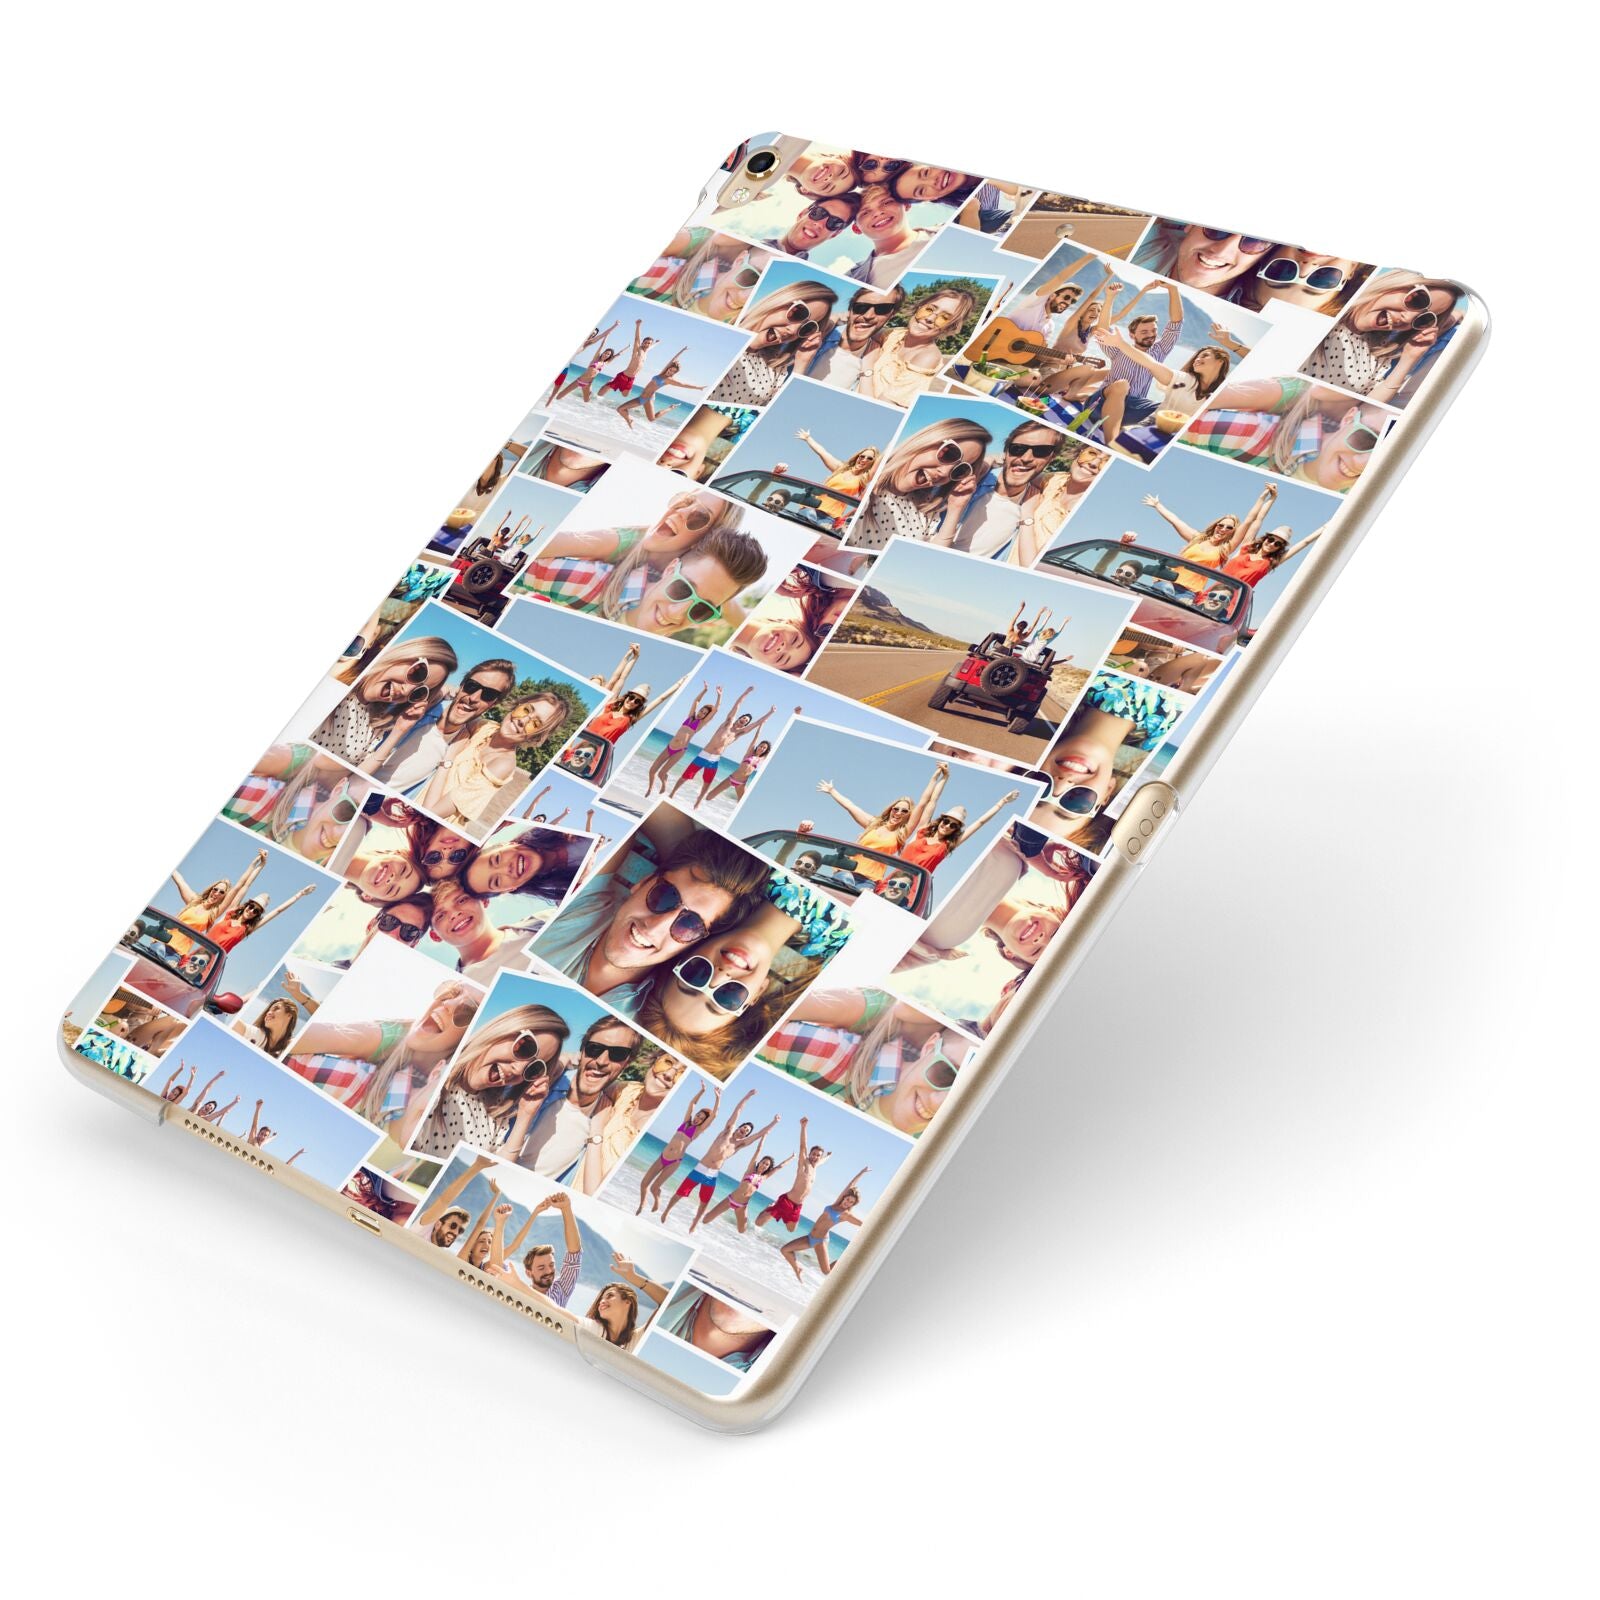 Photo Montage Apple iPad Case on Gold iPad Side View